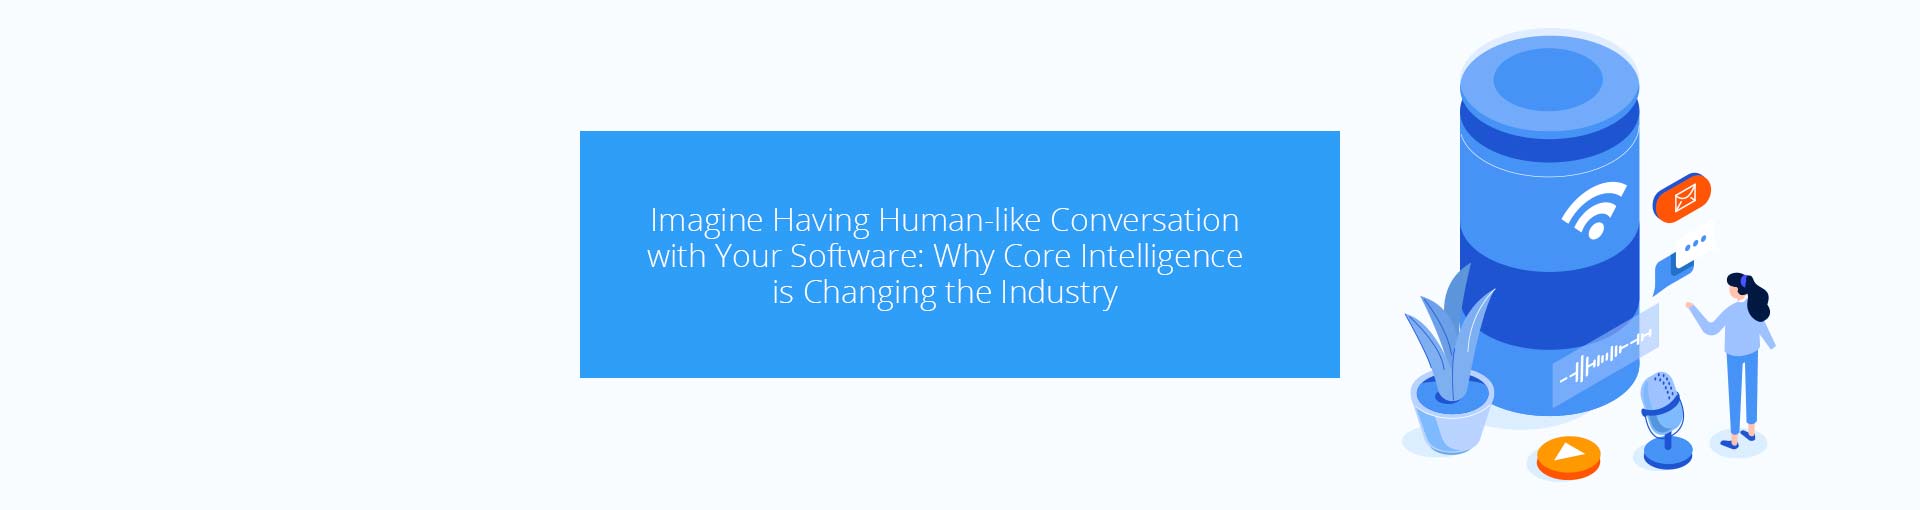 Imagine Having Human-Like Conversations with Your Software: Why CORE Intelligence is Changing the Industry Featured Image